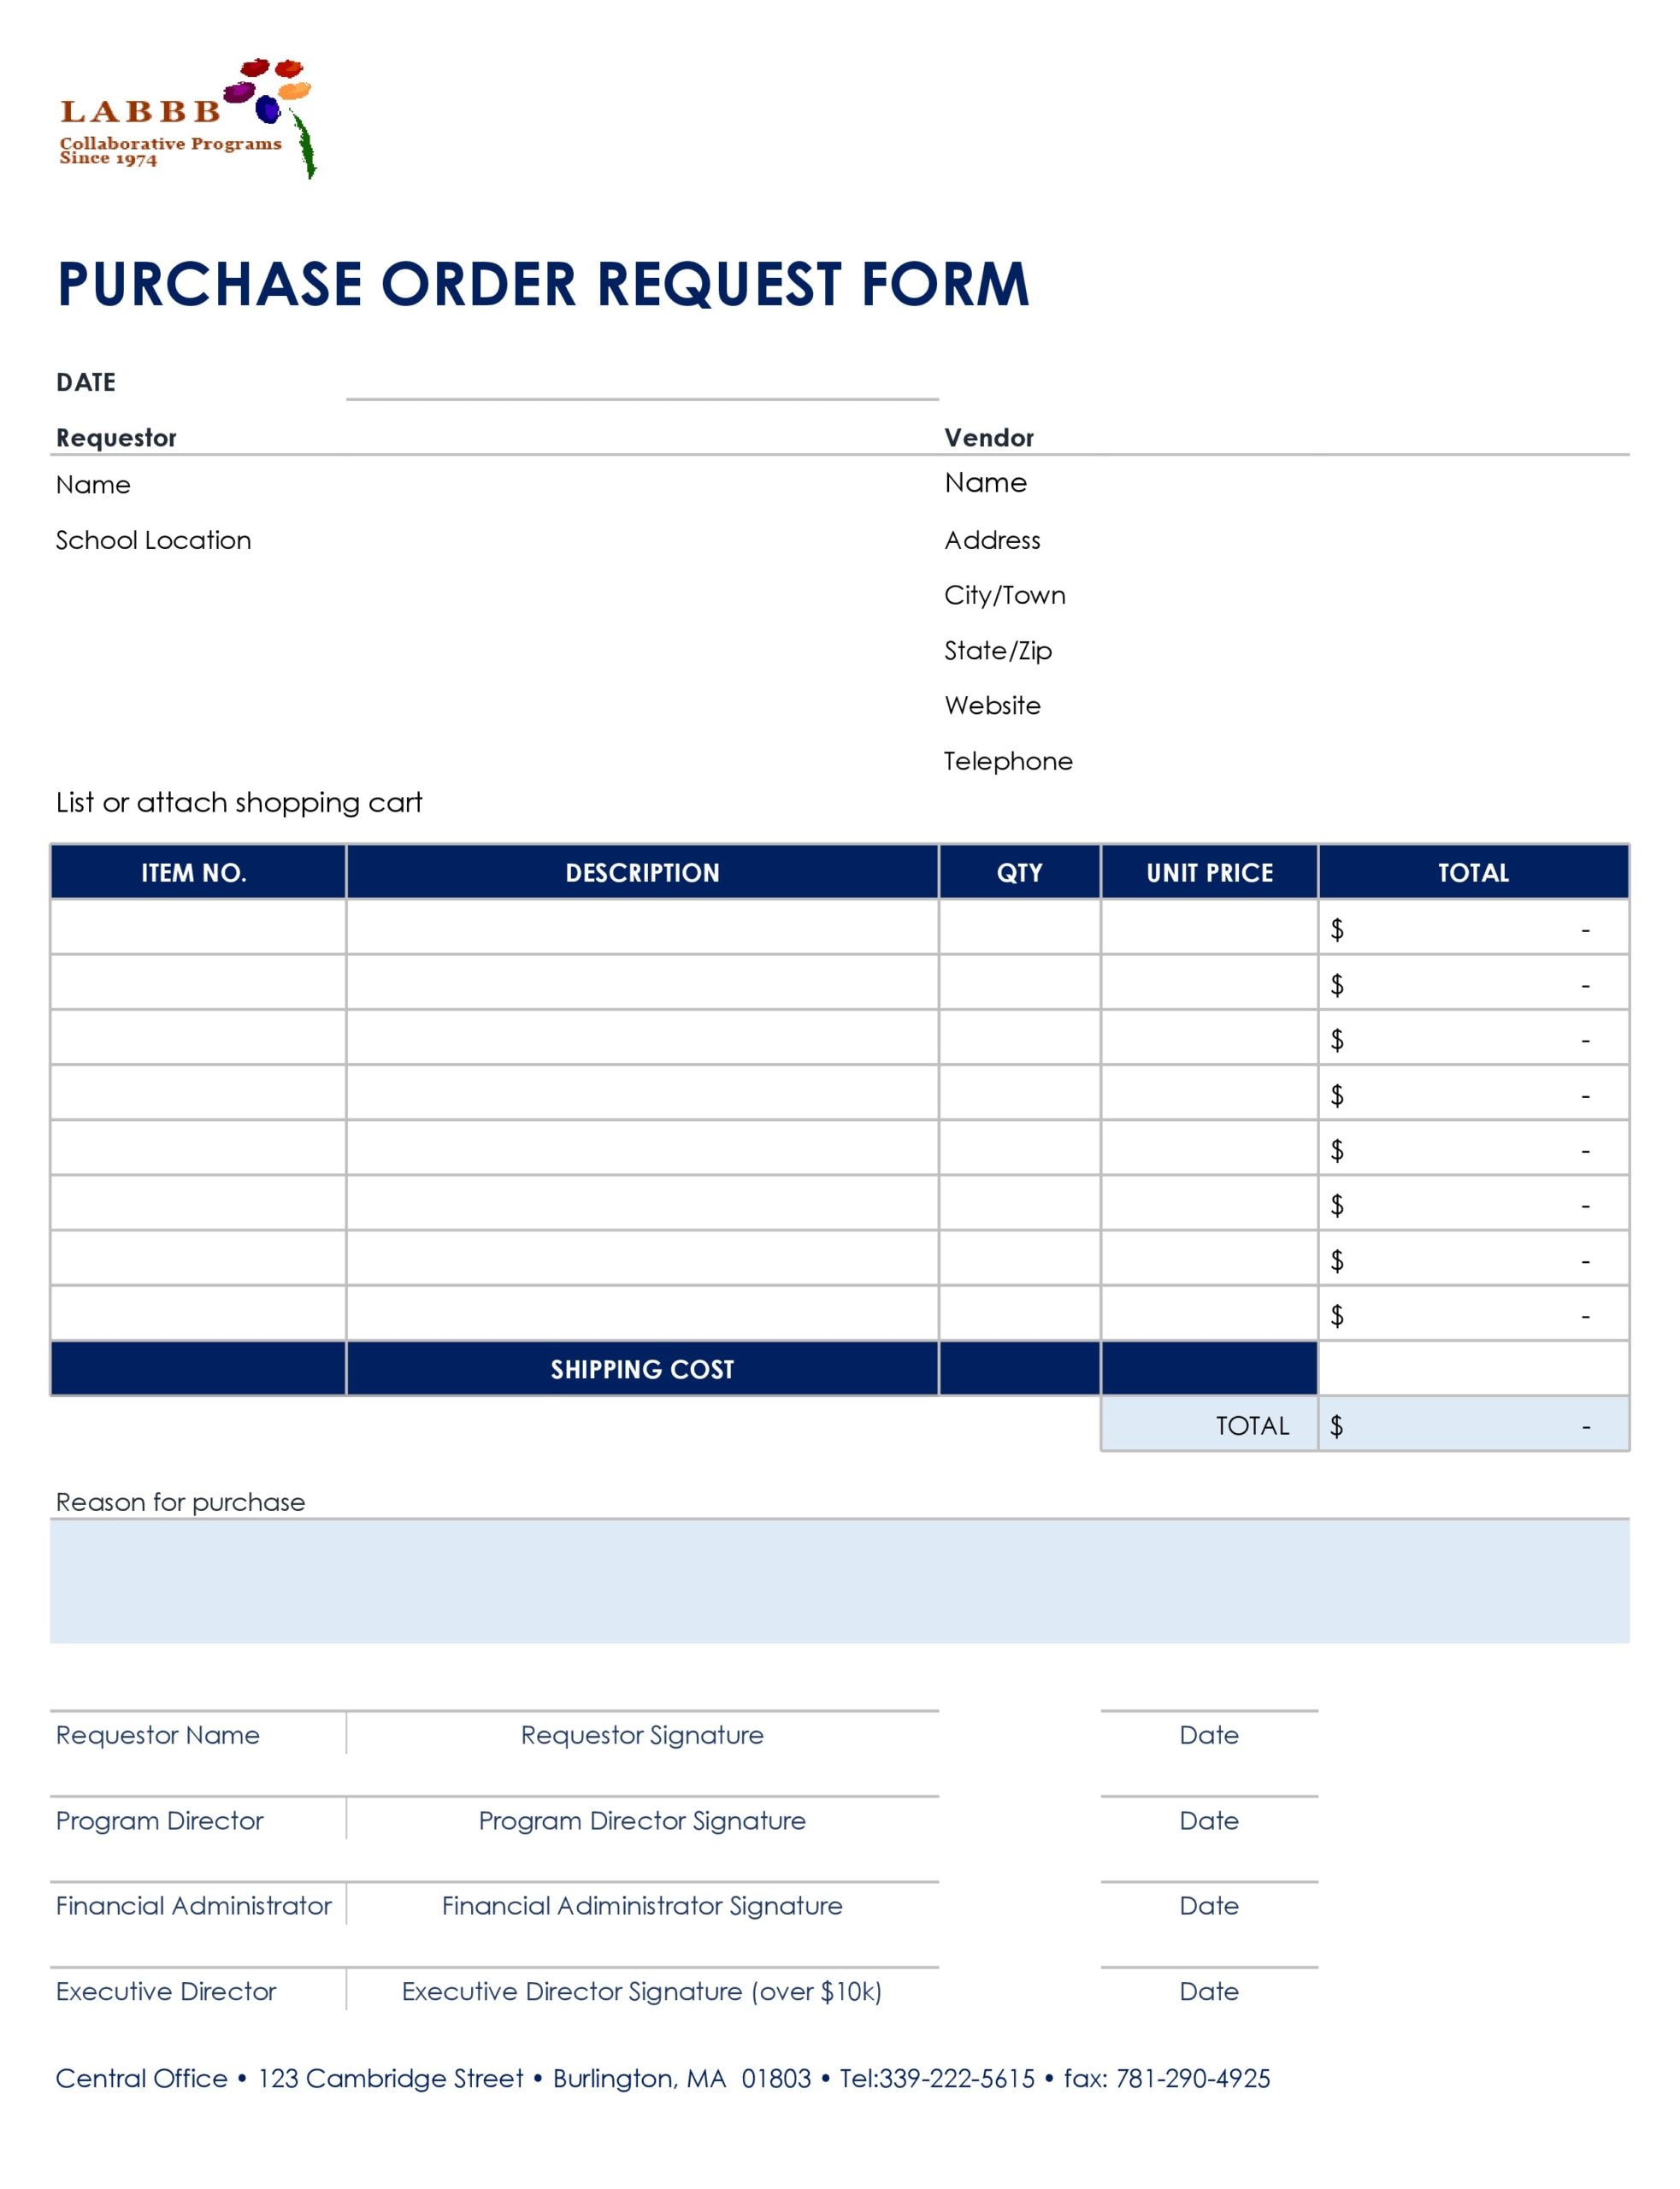 30-free-purchase-order-templates-excel-doc-templatearchive